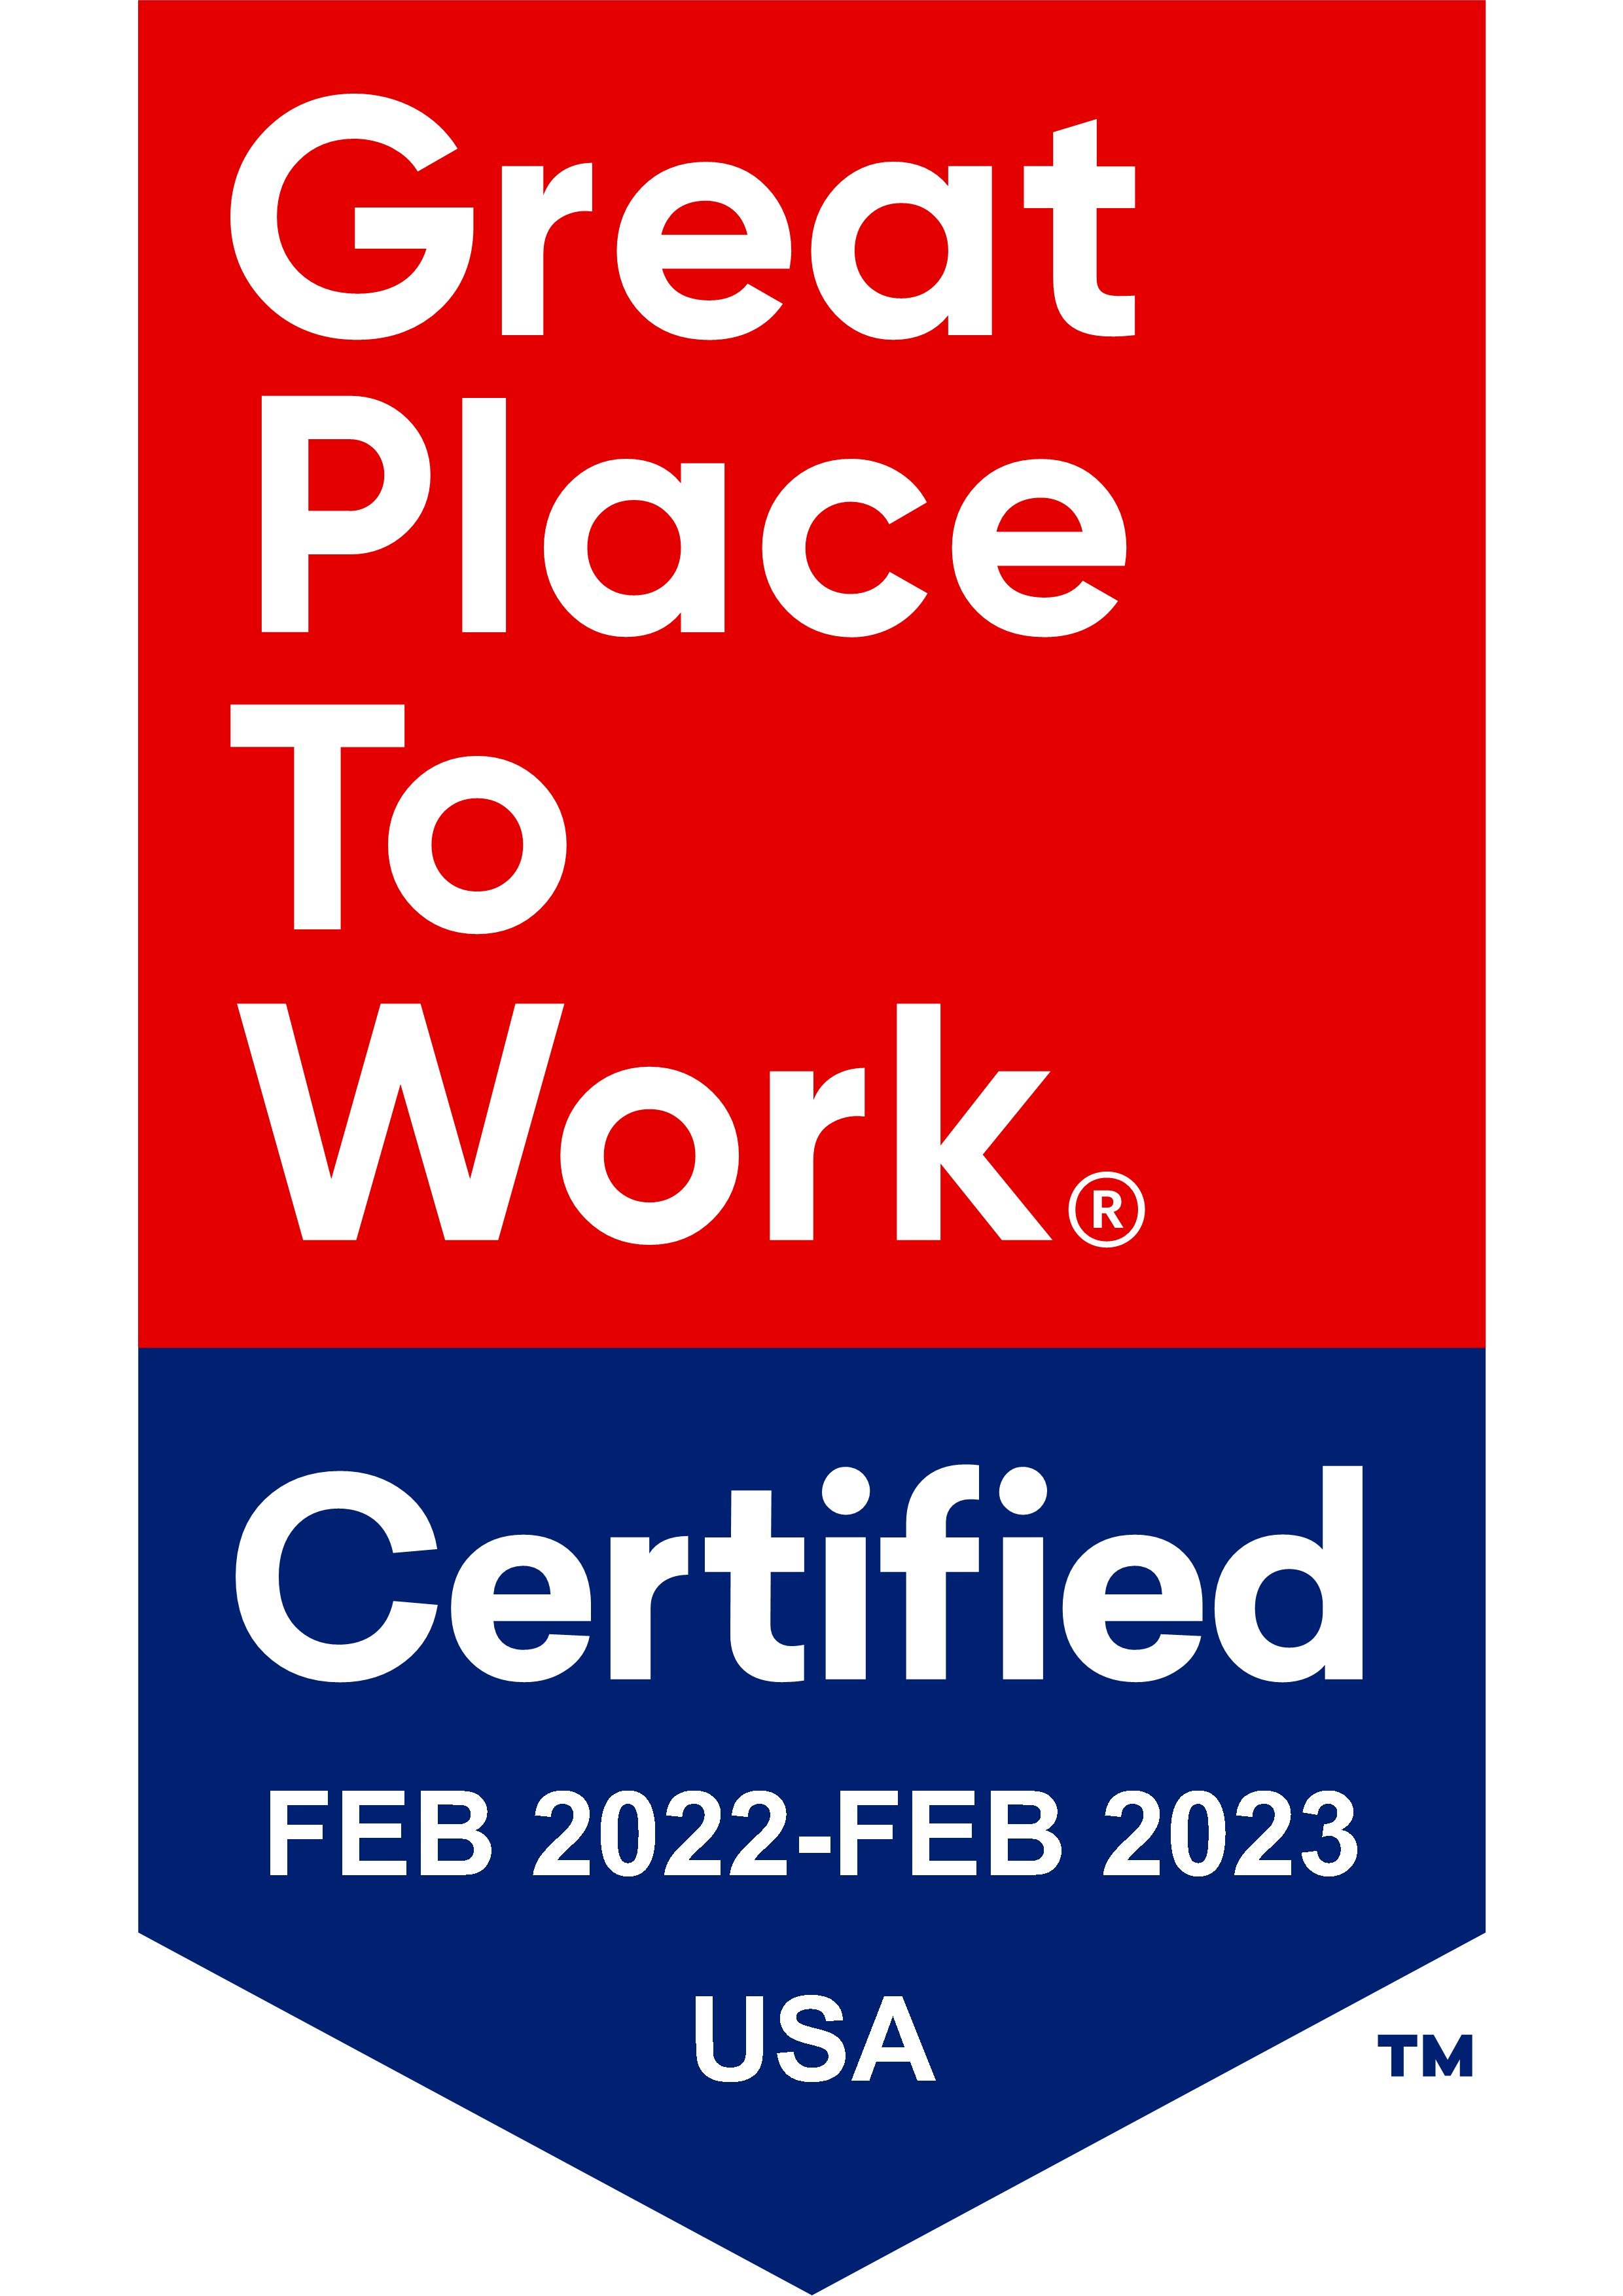 OneScreen.ai 2022 Great Place to Work Certification Badge